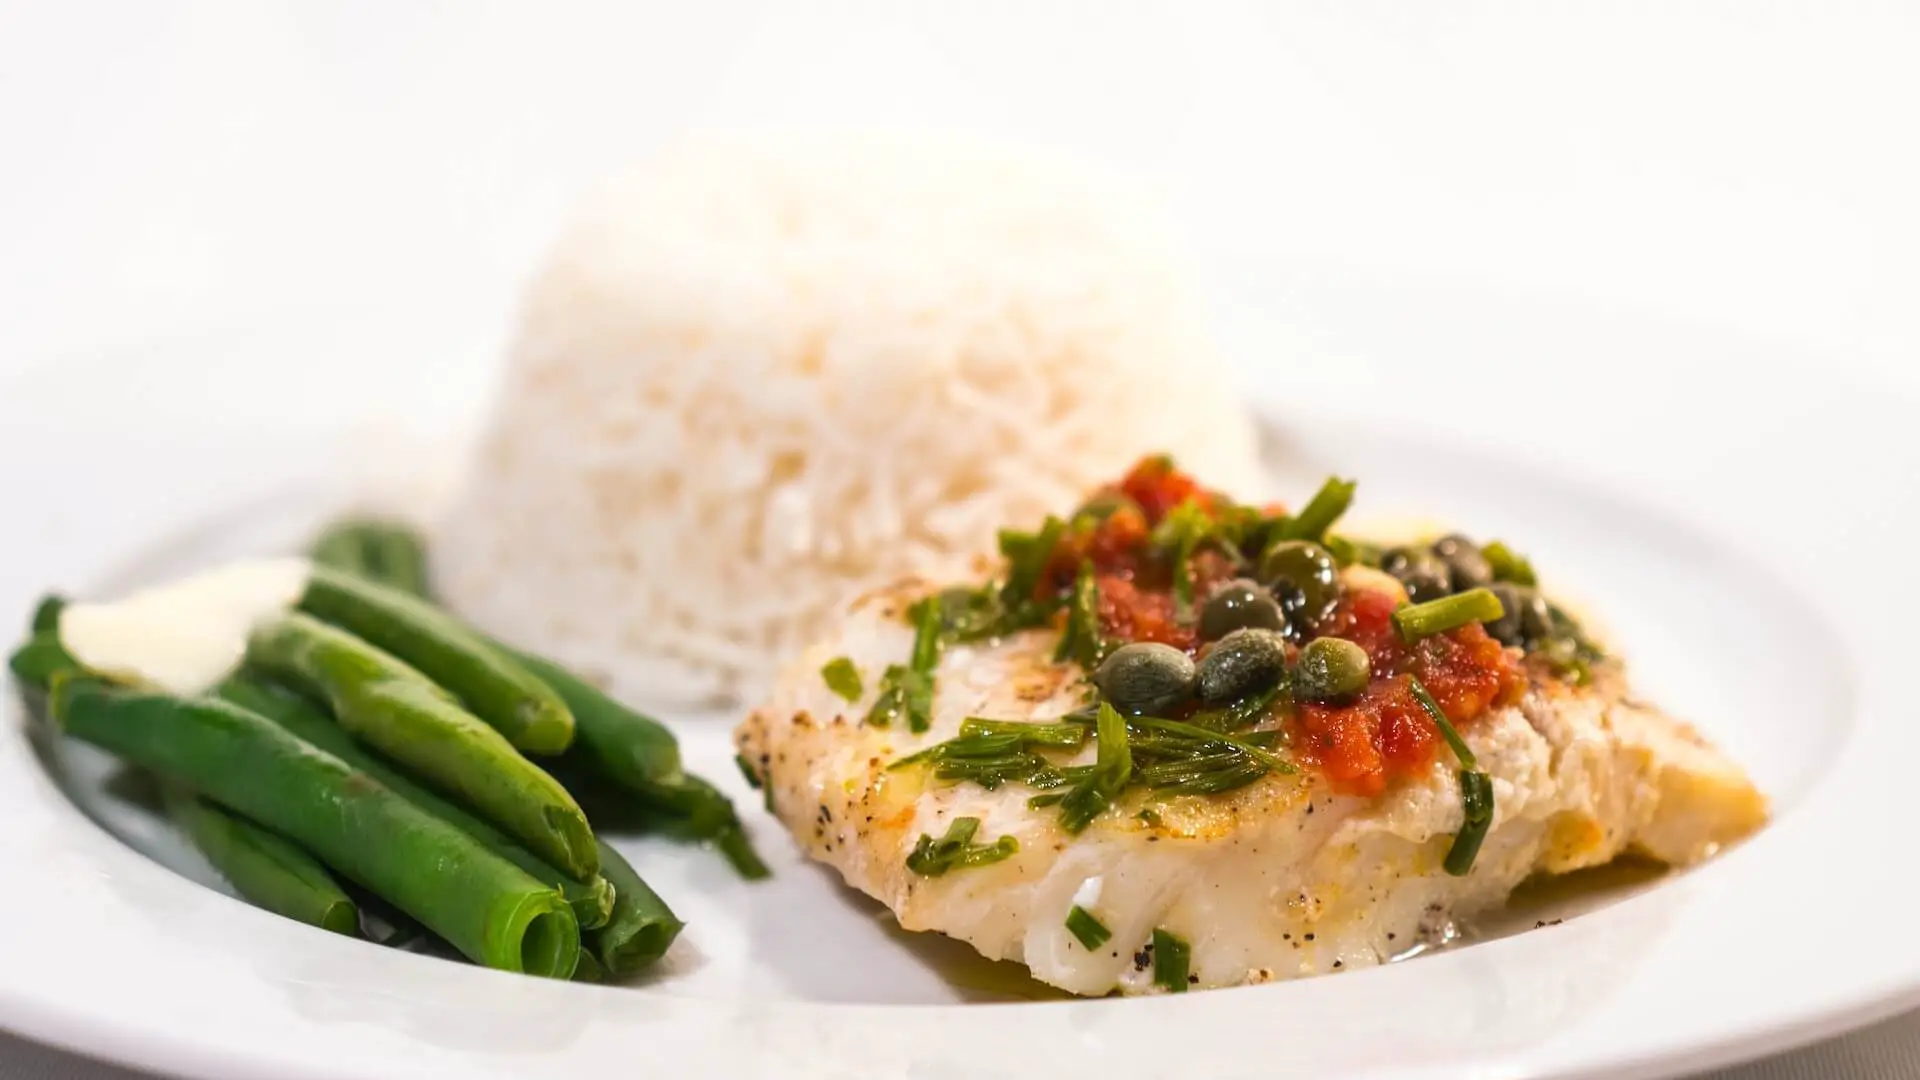 Cod on a plate with beans and rice